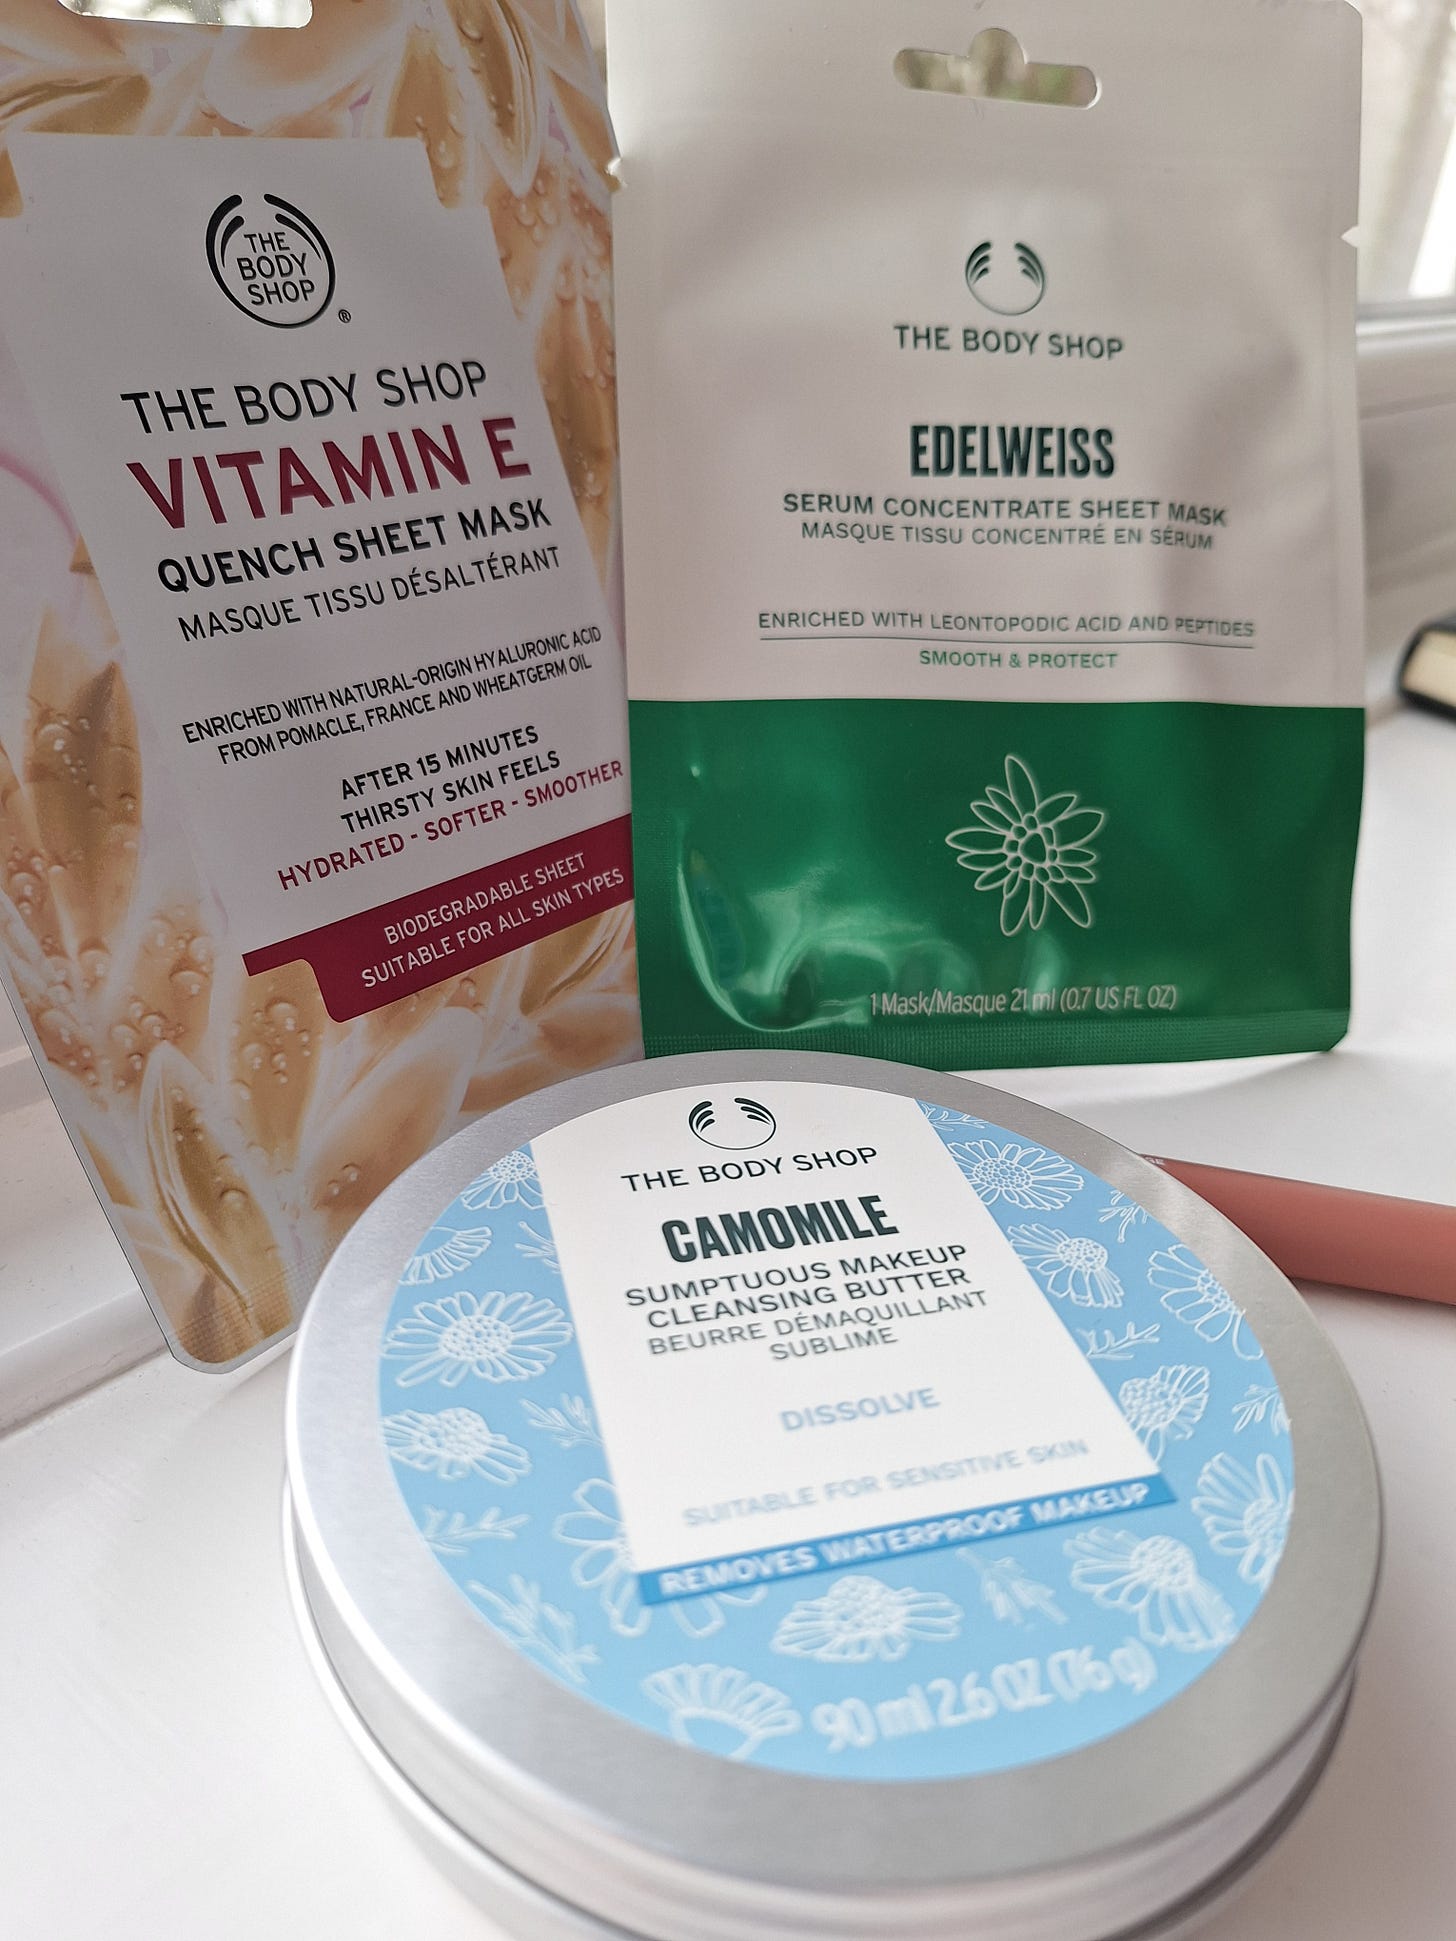 Photo of The Body Shop products - masks, claensing butter and lip pencil